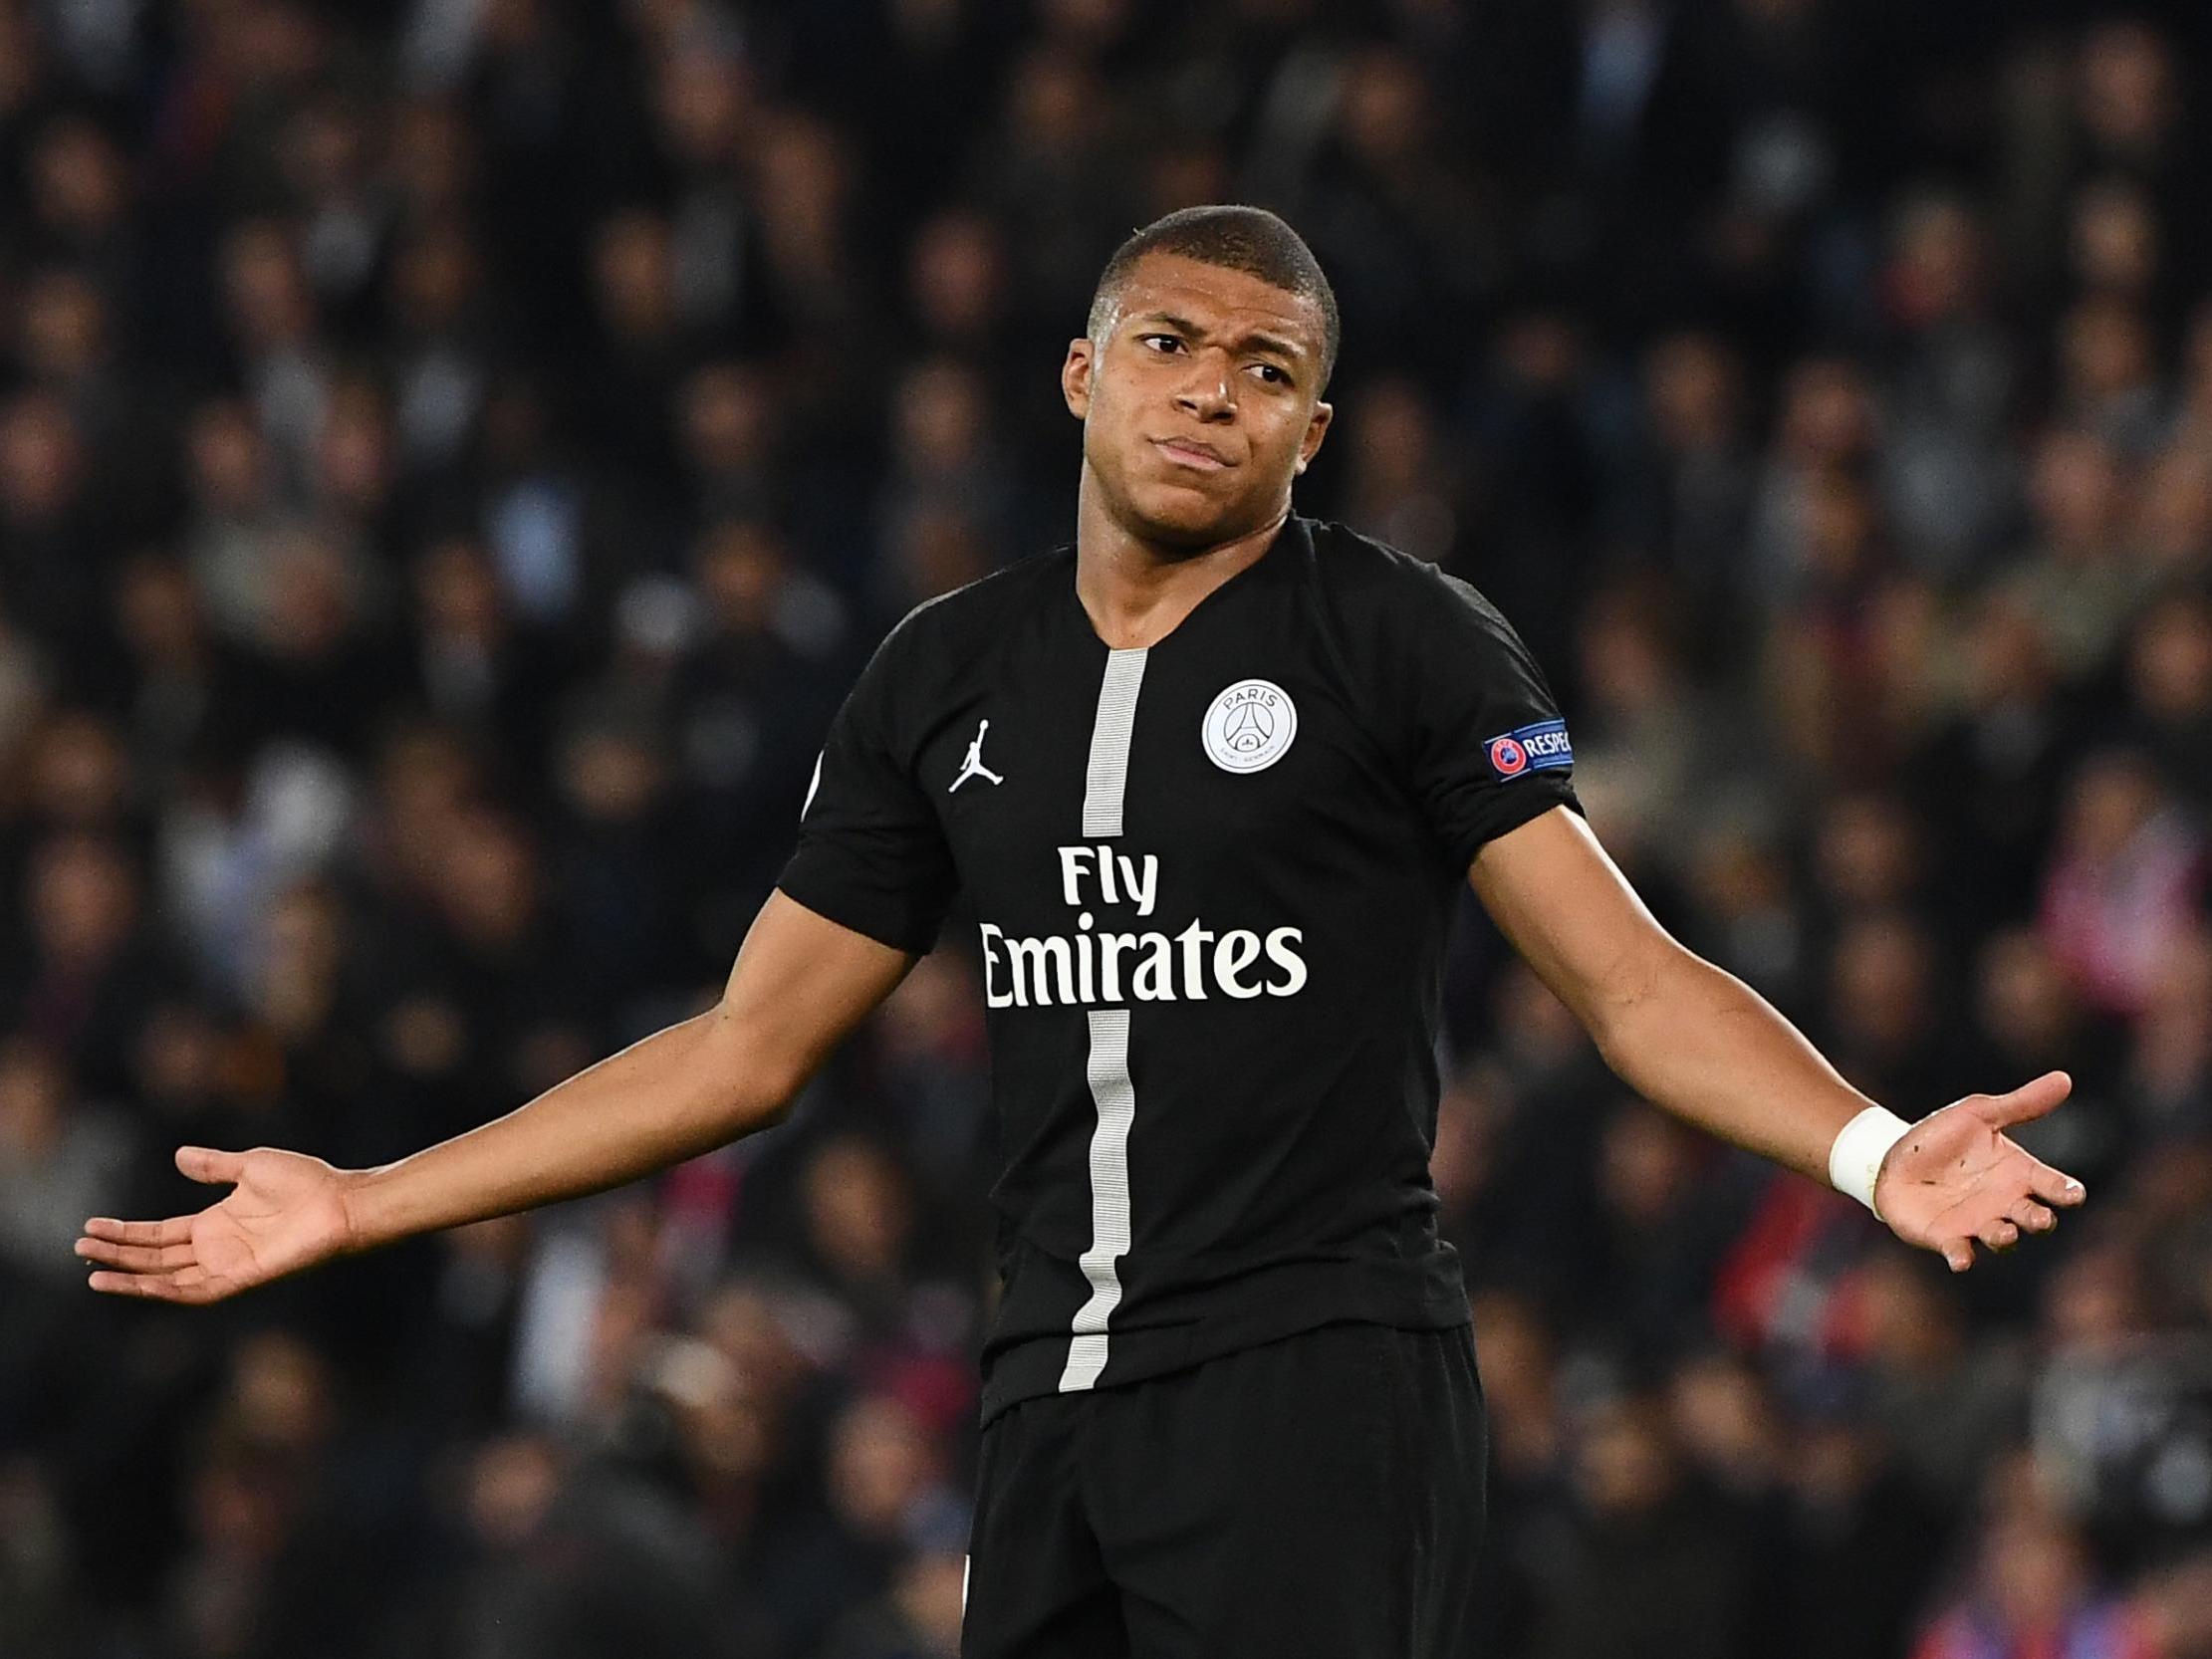 Kylian Mbappe and Adrien Rabiot benched as punishment by Thomas Tuchel as Paris Saint-Germain beat Marseille